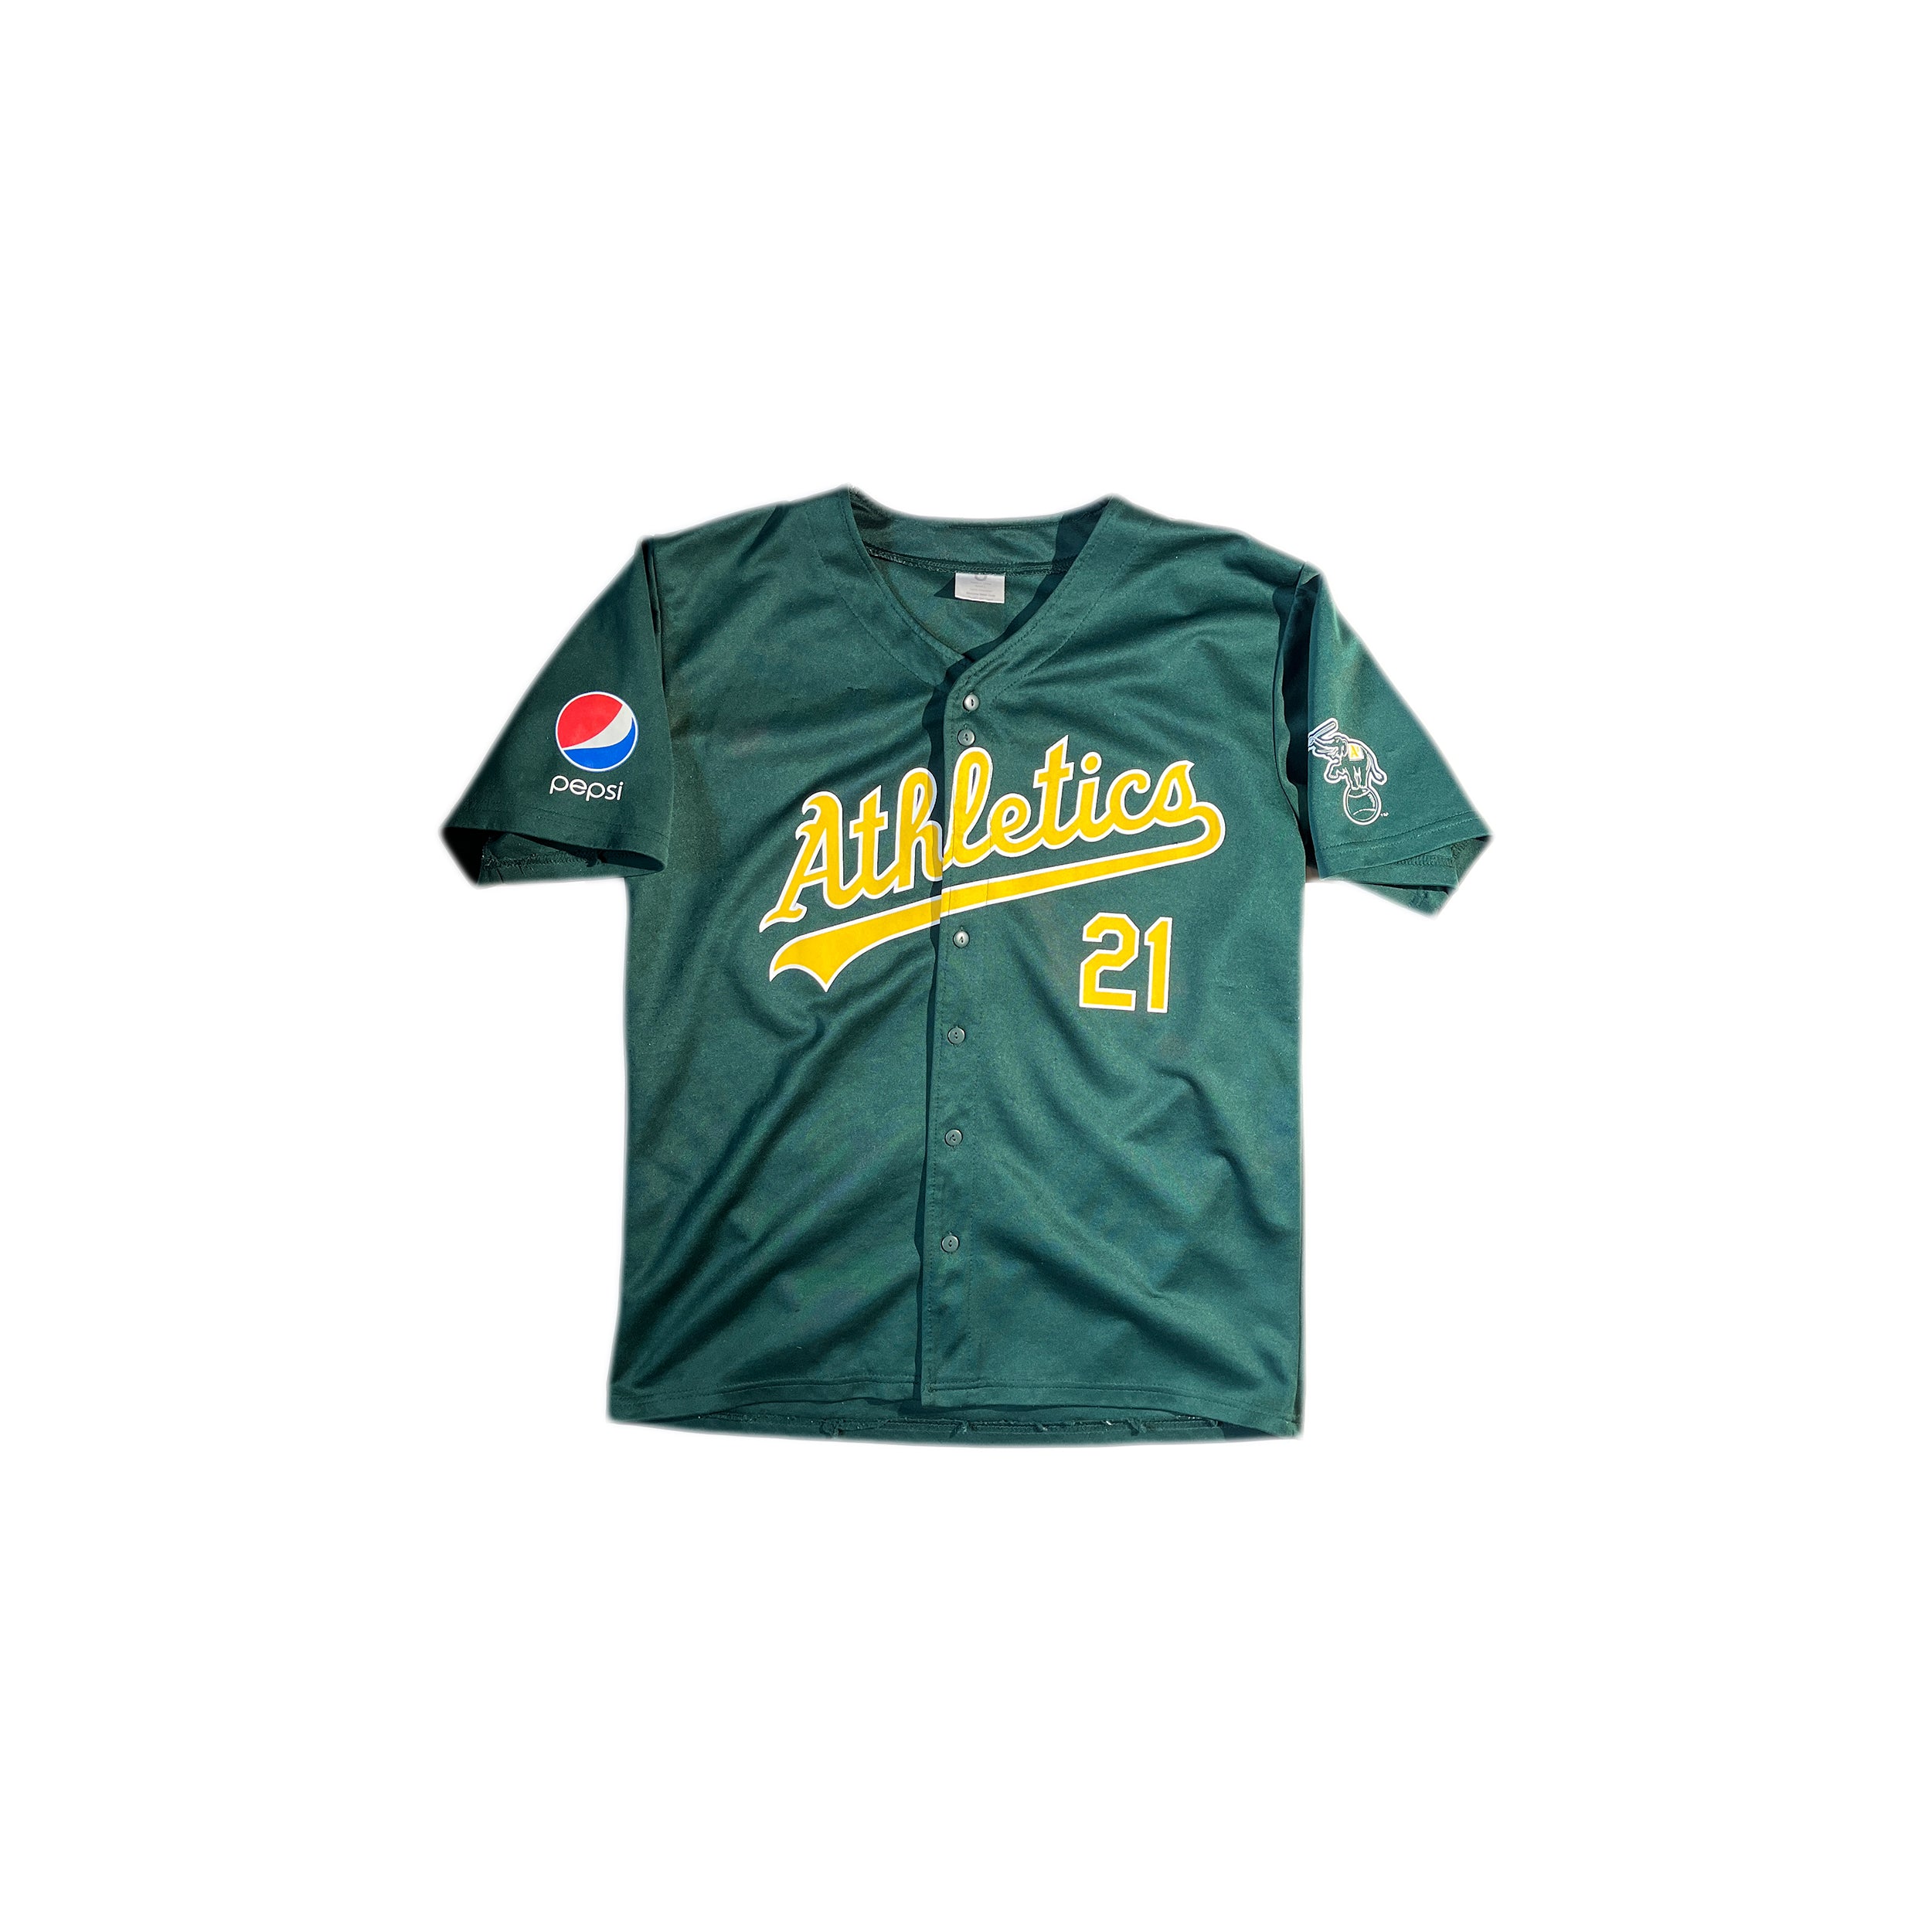 Vintage Majestic Oakland A's Athletics Batting Practice Jersey Adult Size  Small